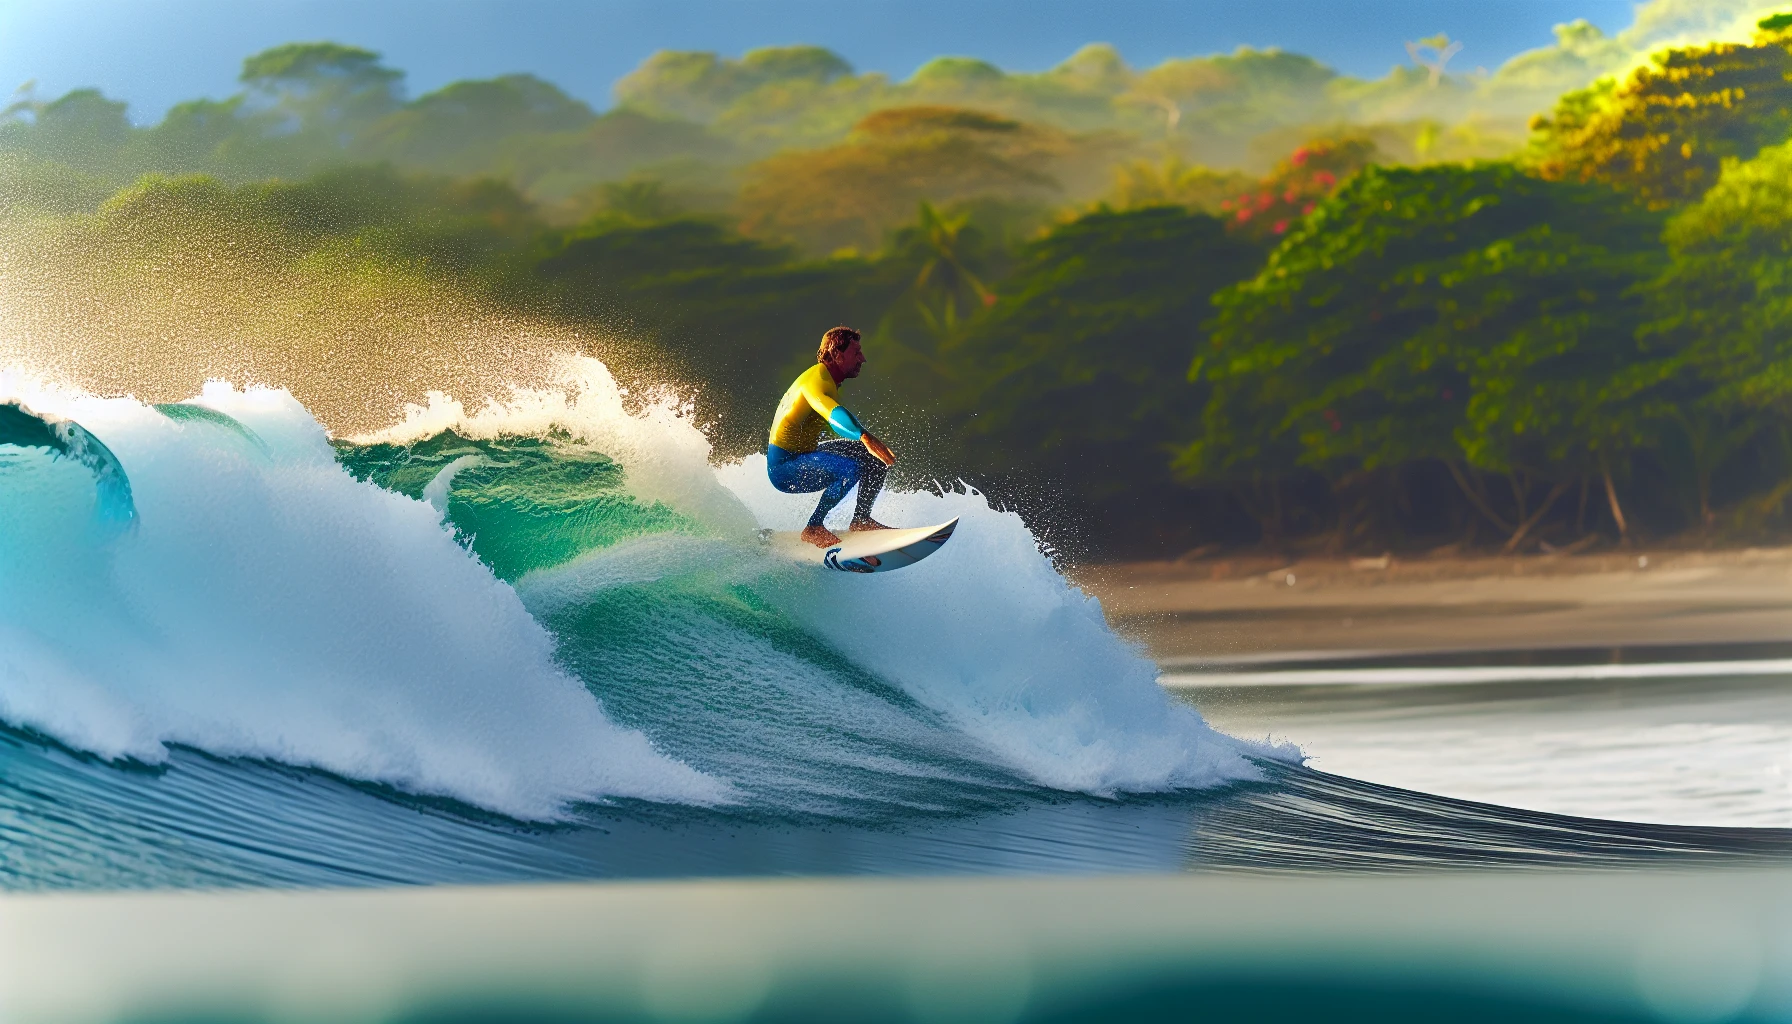 Surfer riding a wave in Costa Rica